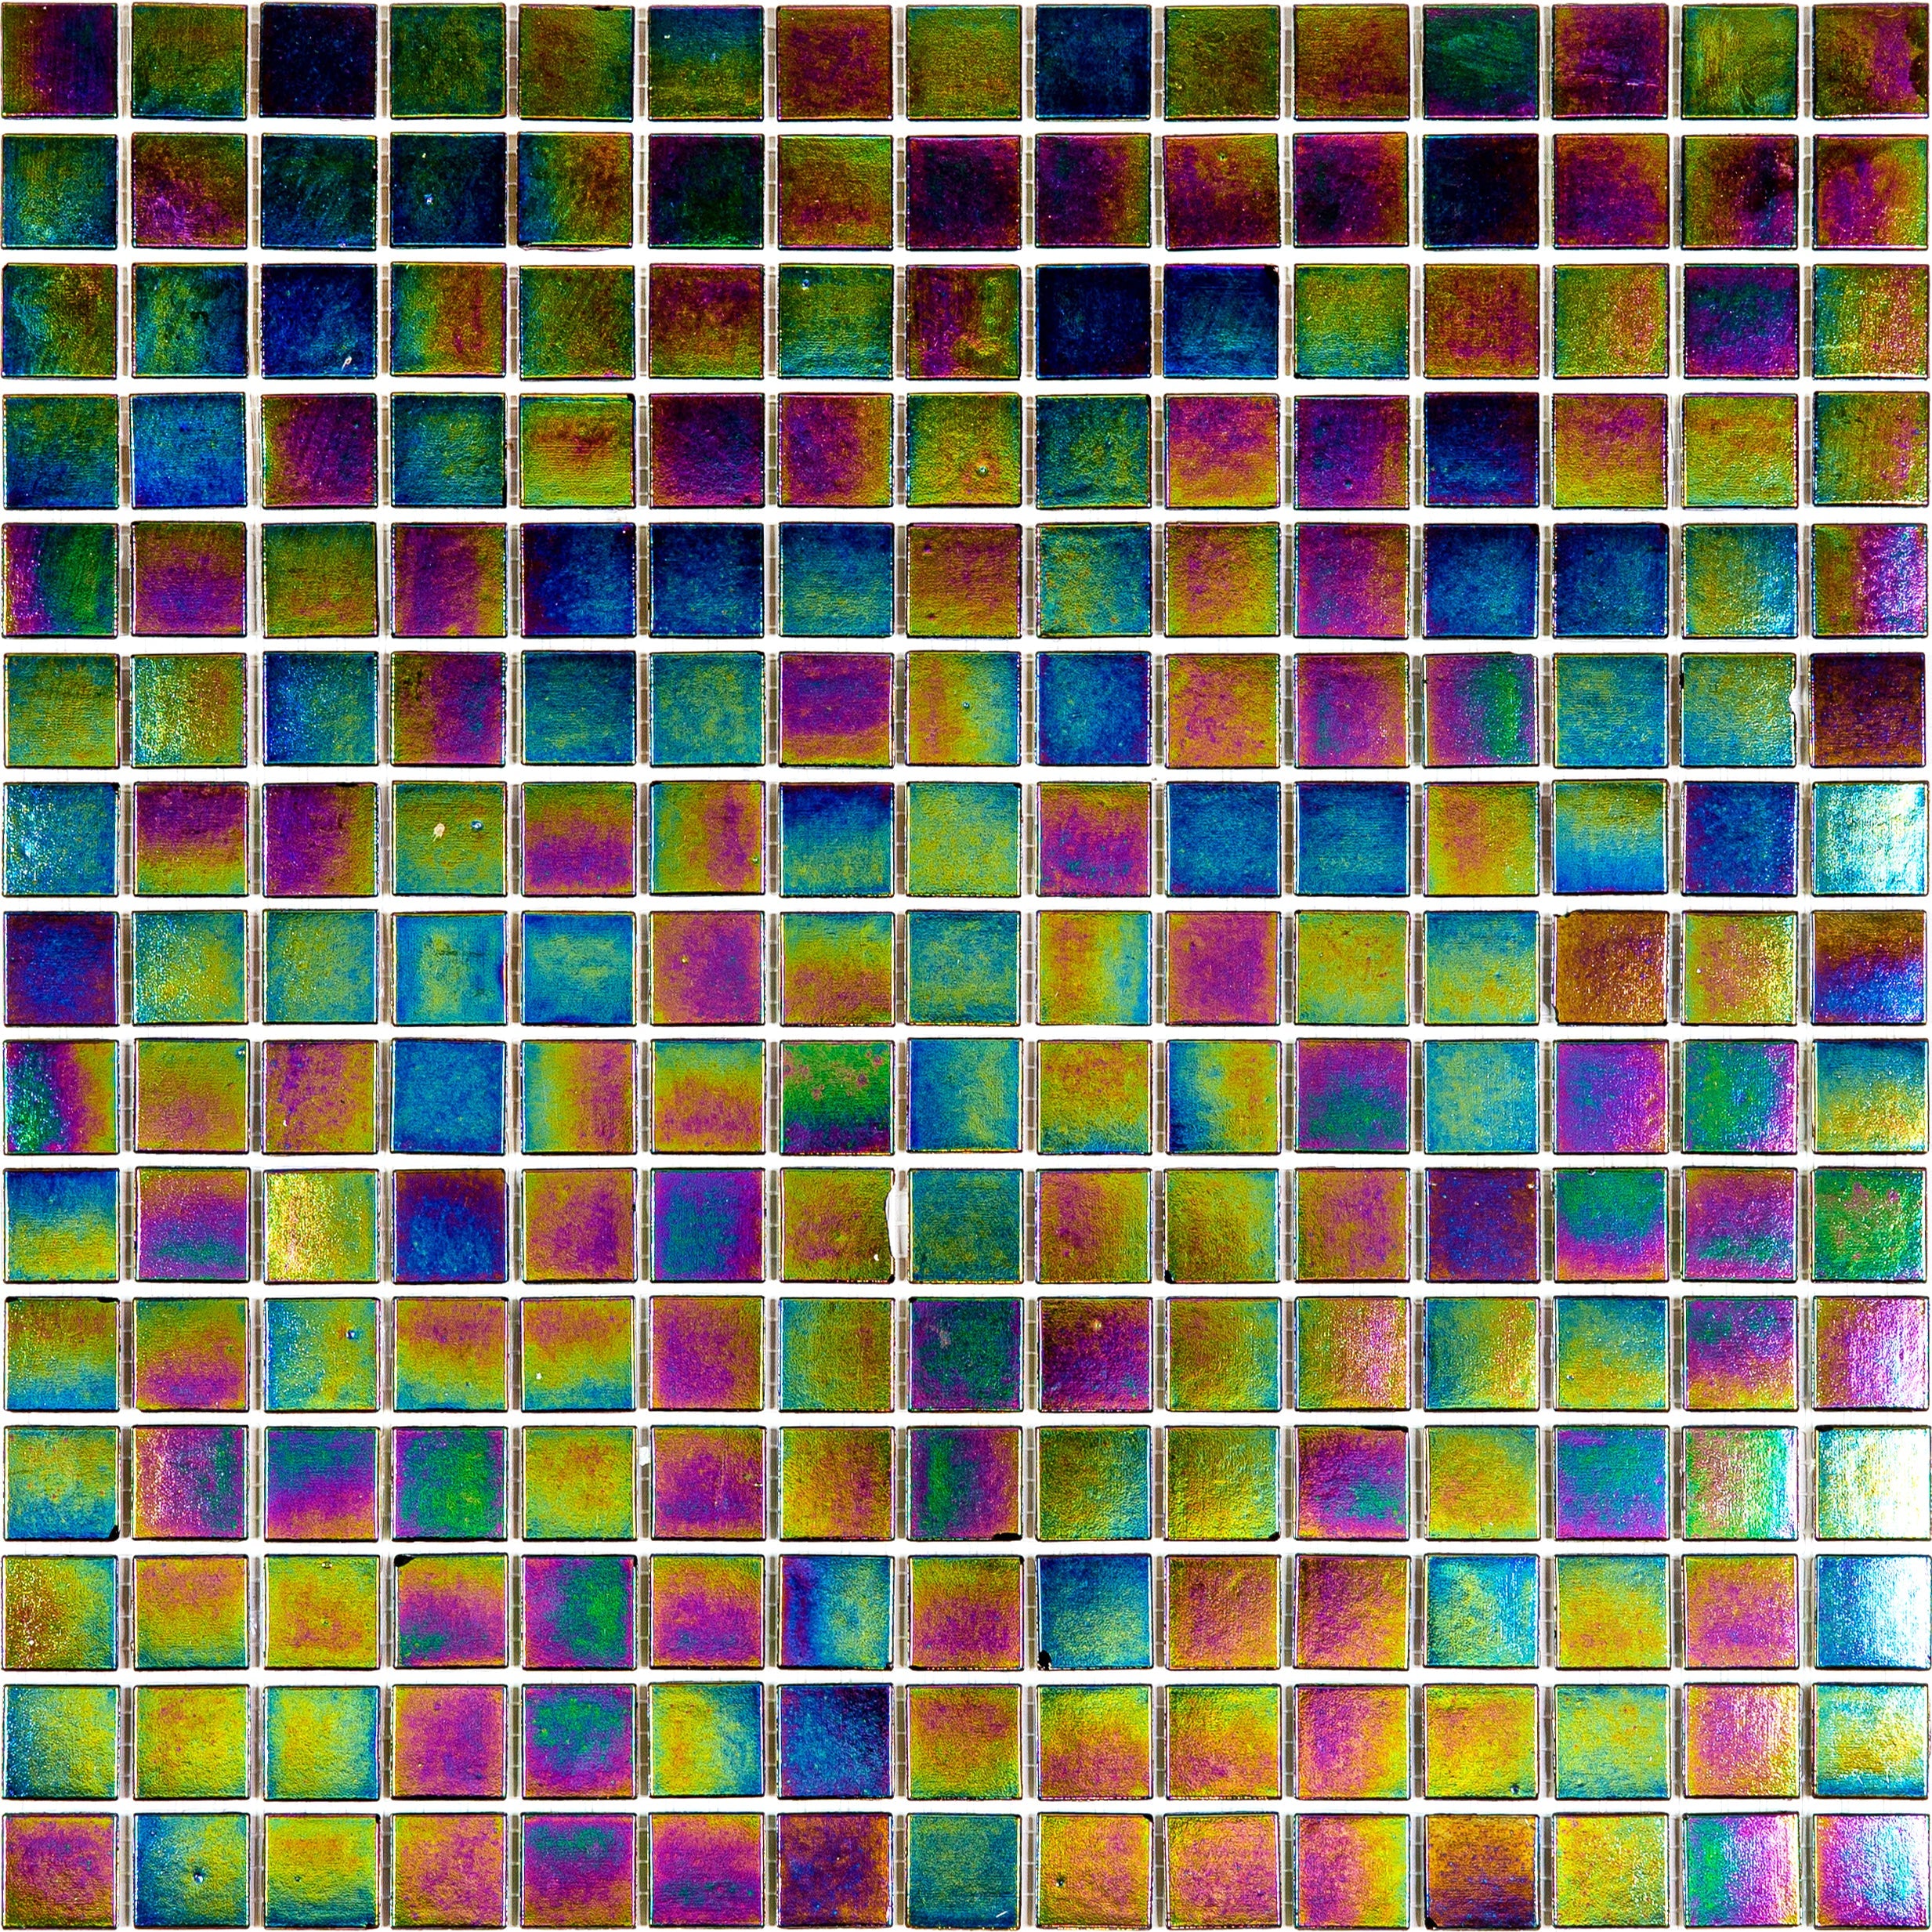 mir alma solid colors 0_8 inch pearly pe155 wall and floor mosaic distributed by surface group natural materials